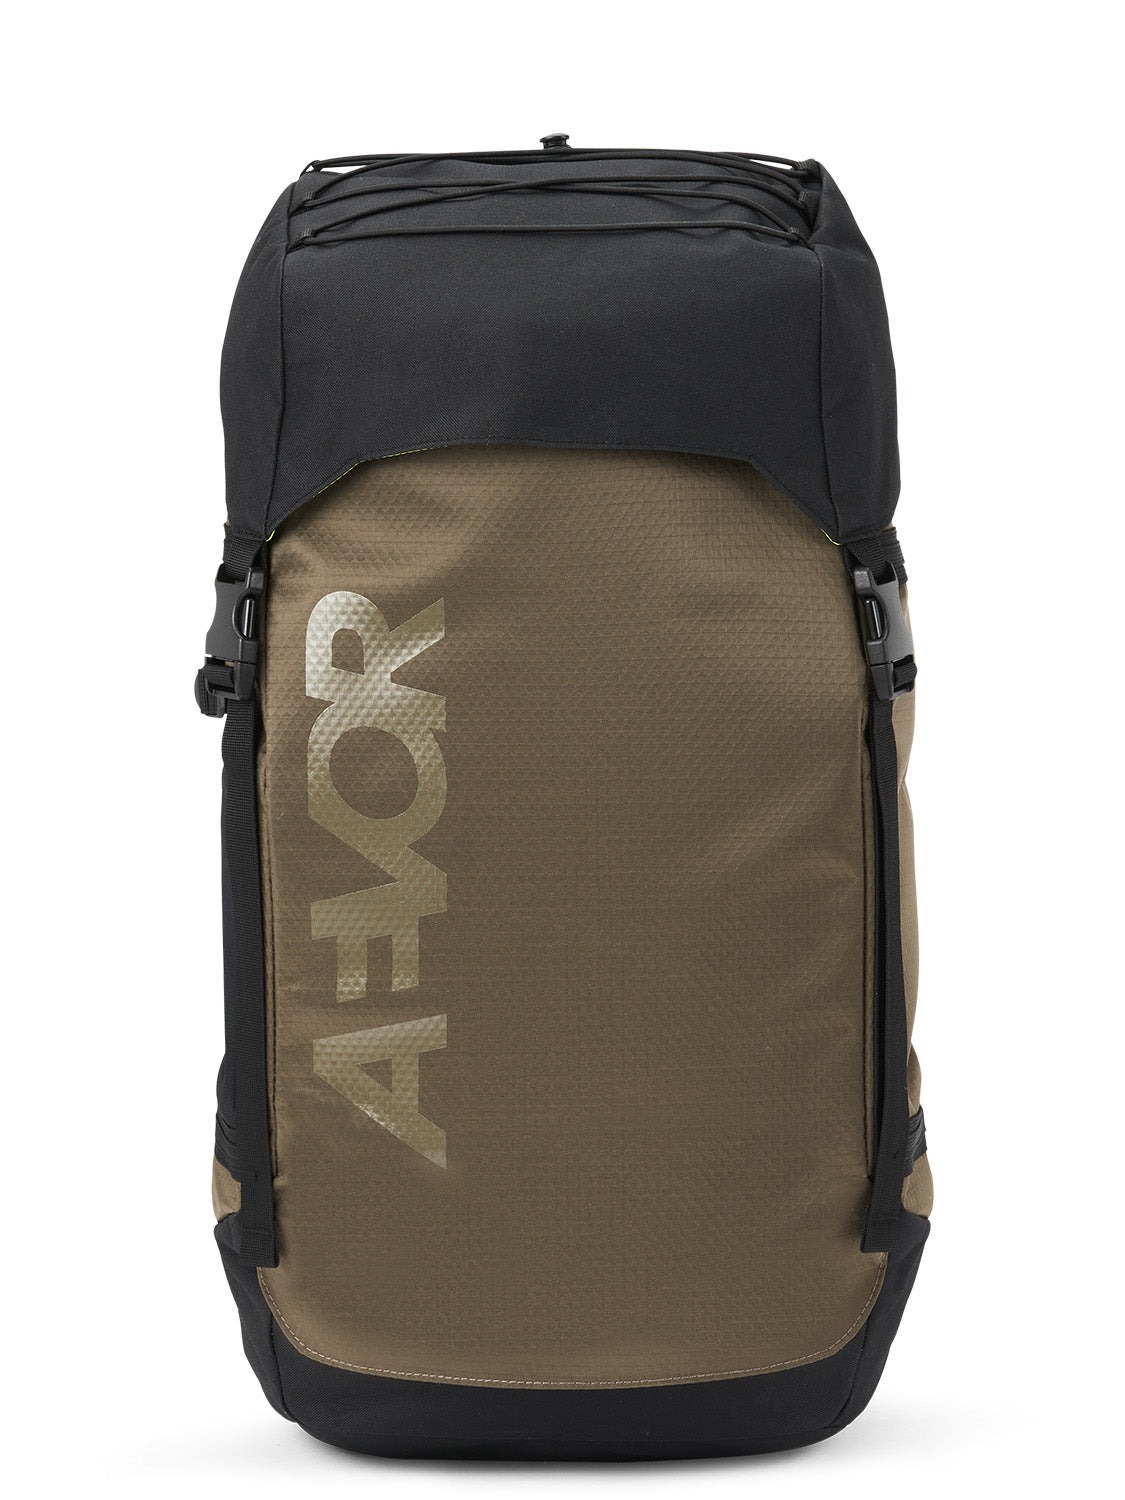 Explore Pack - Proof Olive Gold